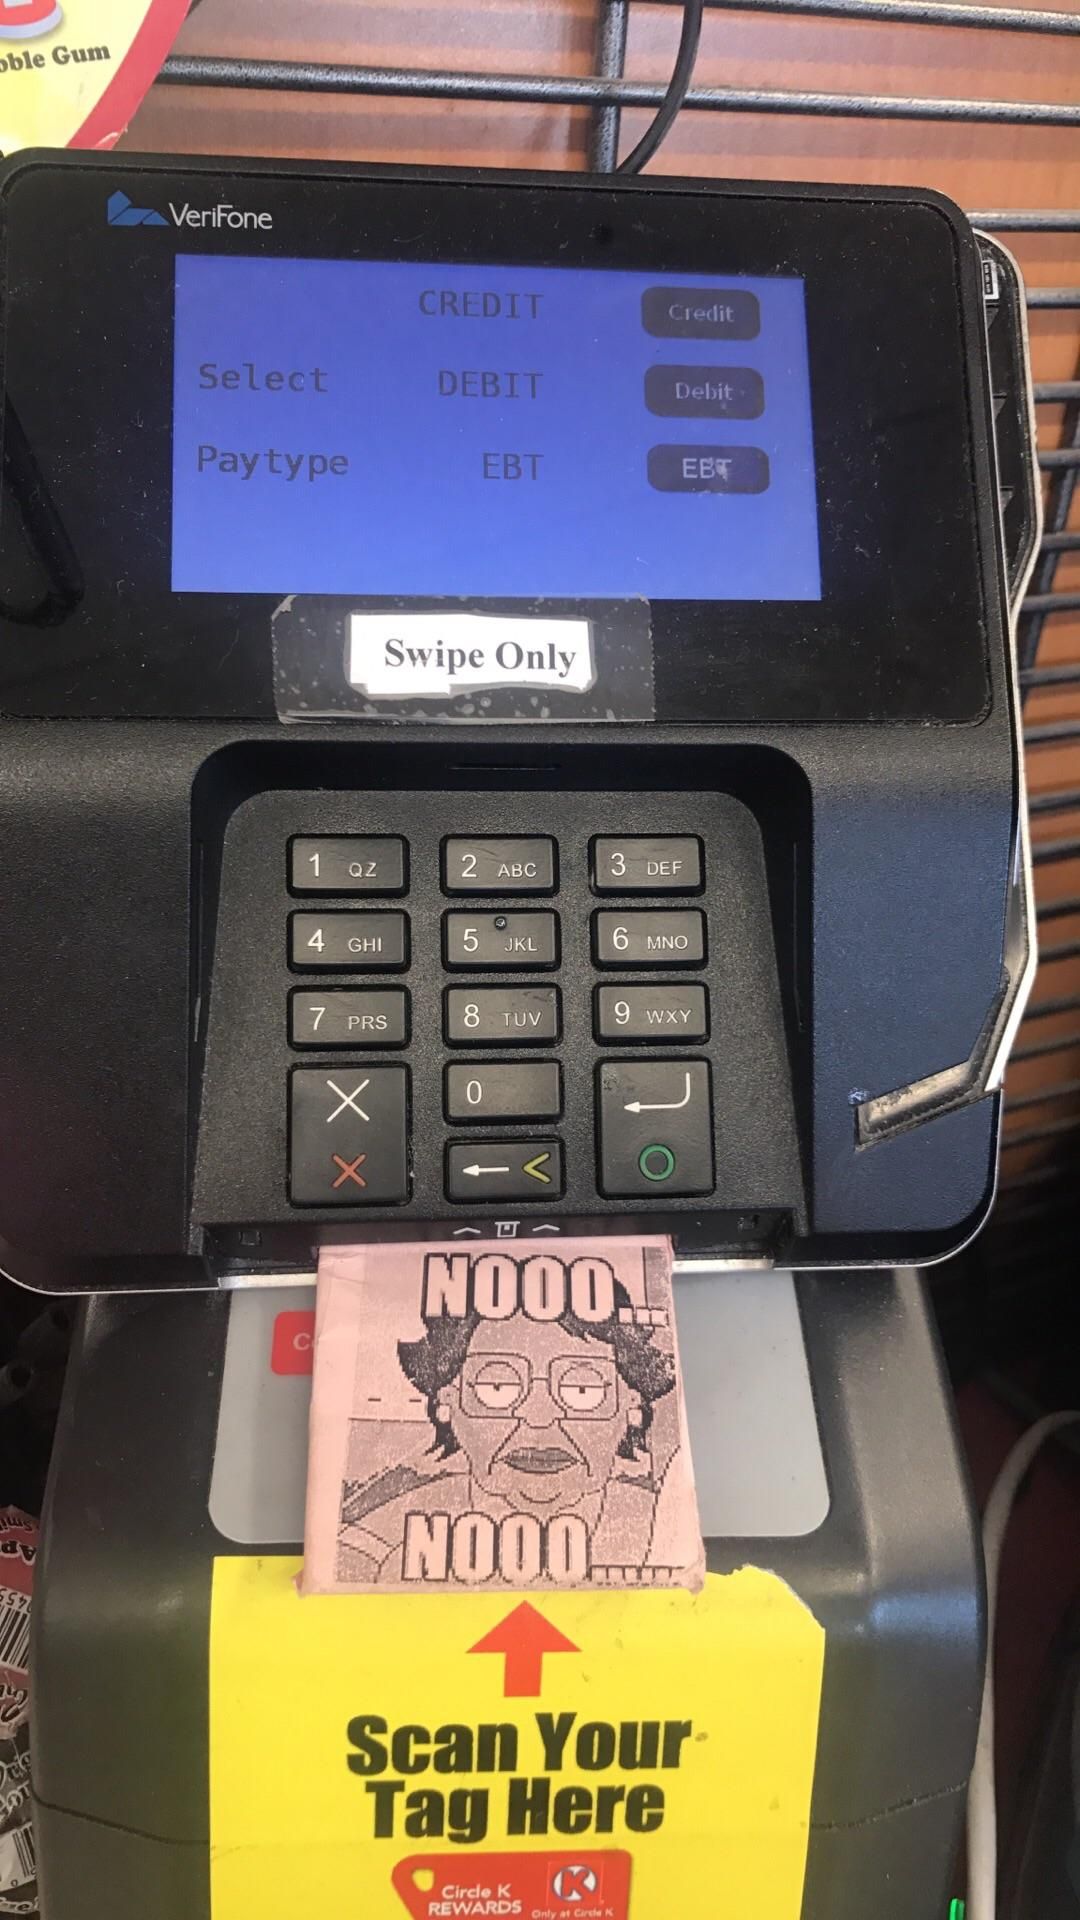 I guess they don't have the chip reader.